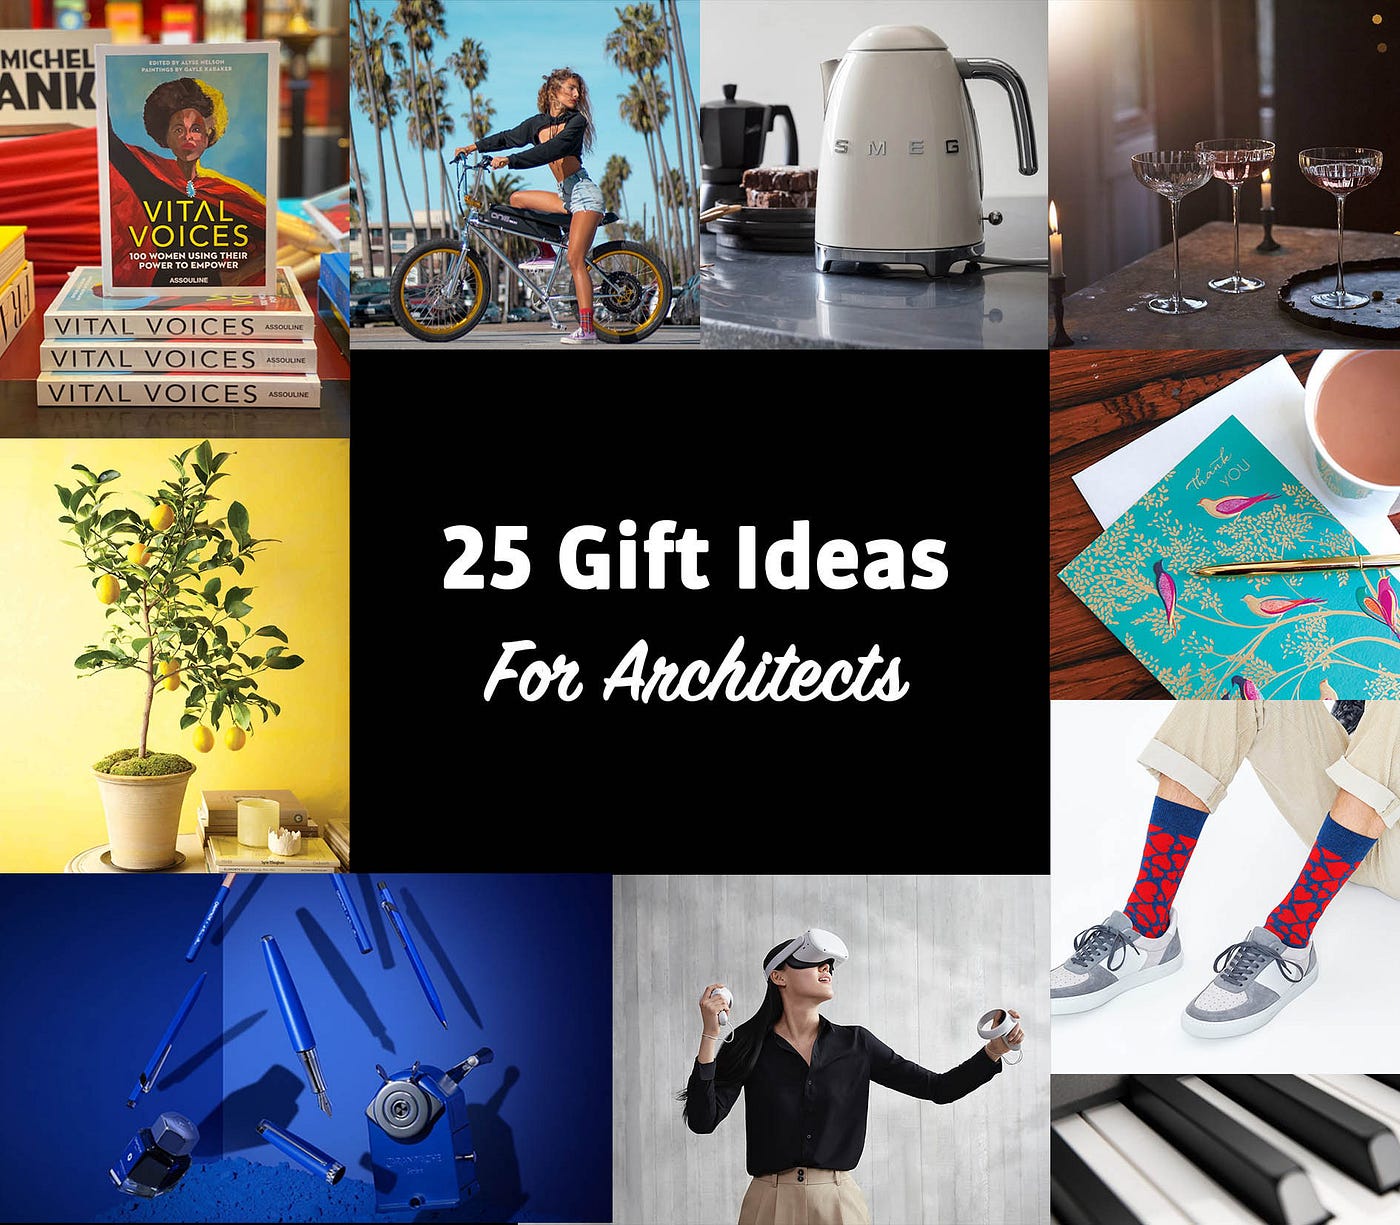 25 Gift Ideas For Architects. A most delightful gift list for… | by  Architectour Guide | Medium